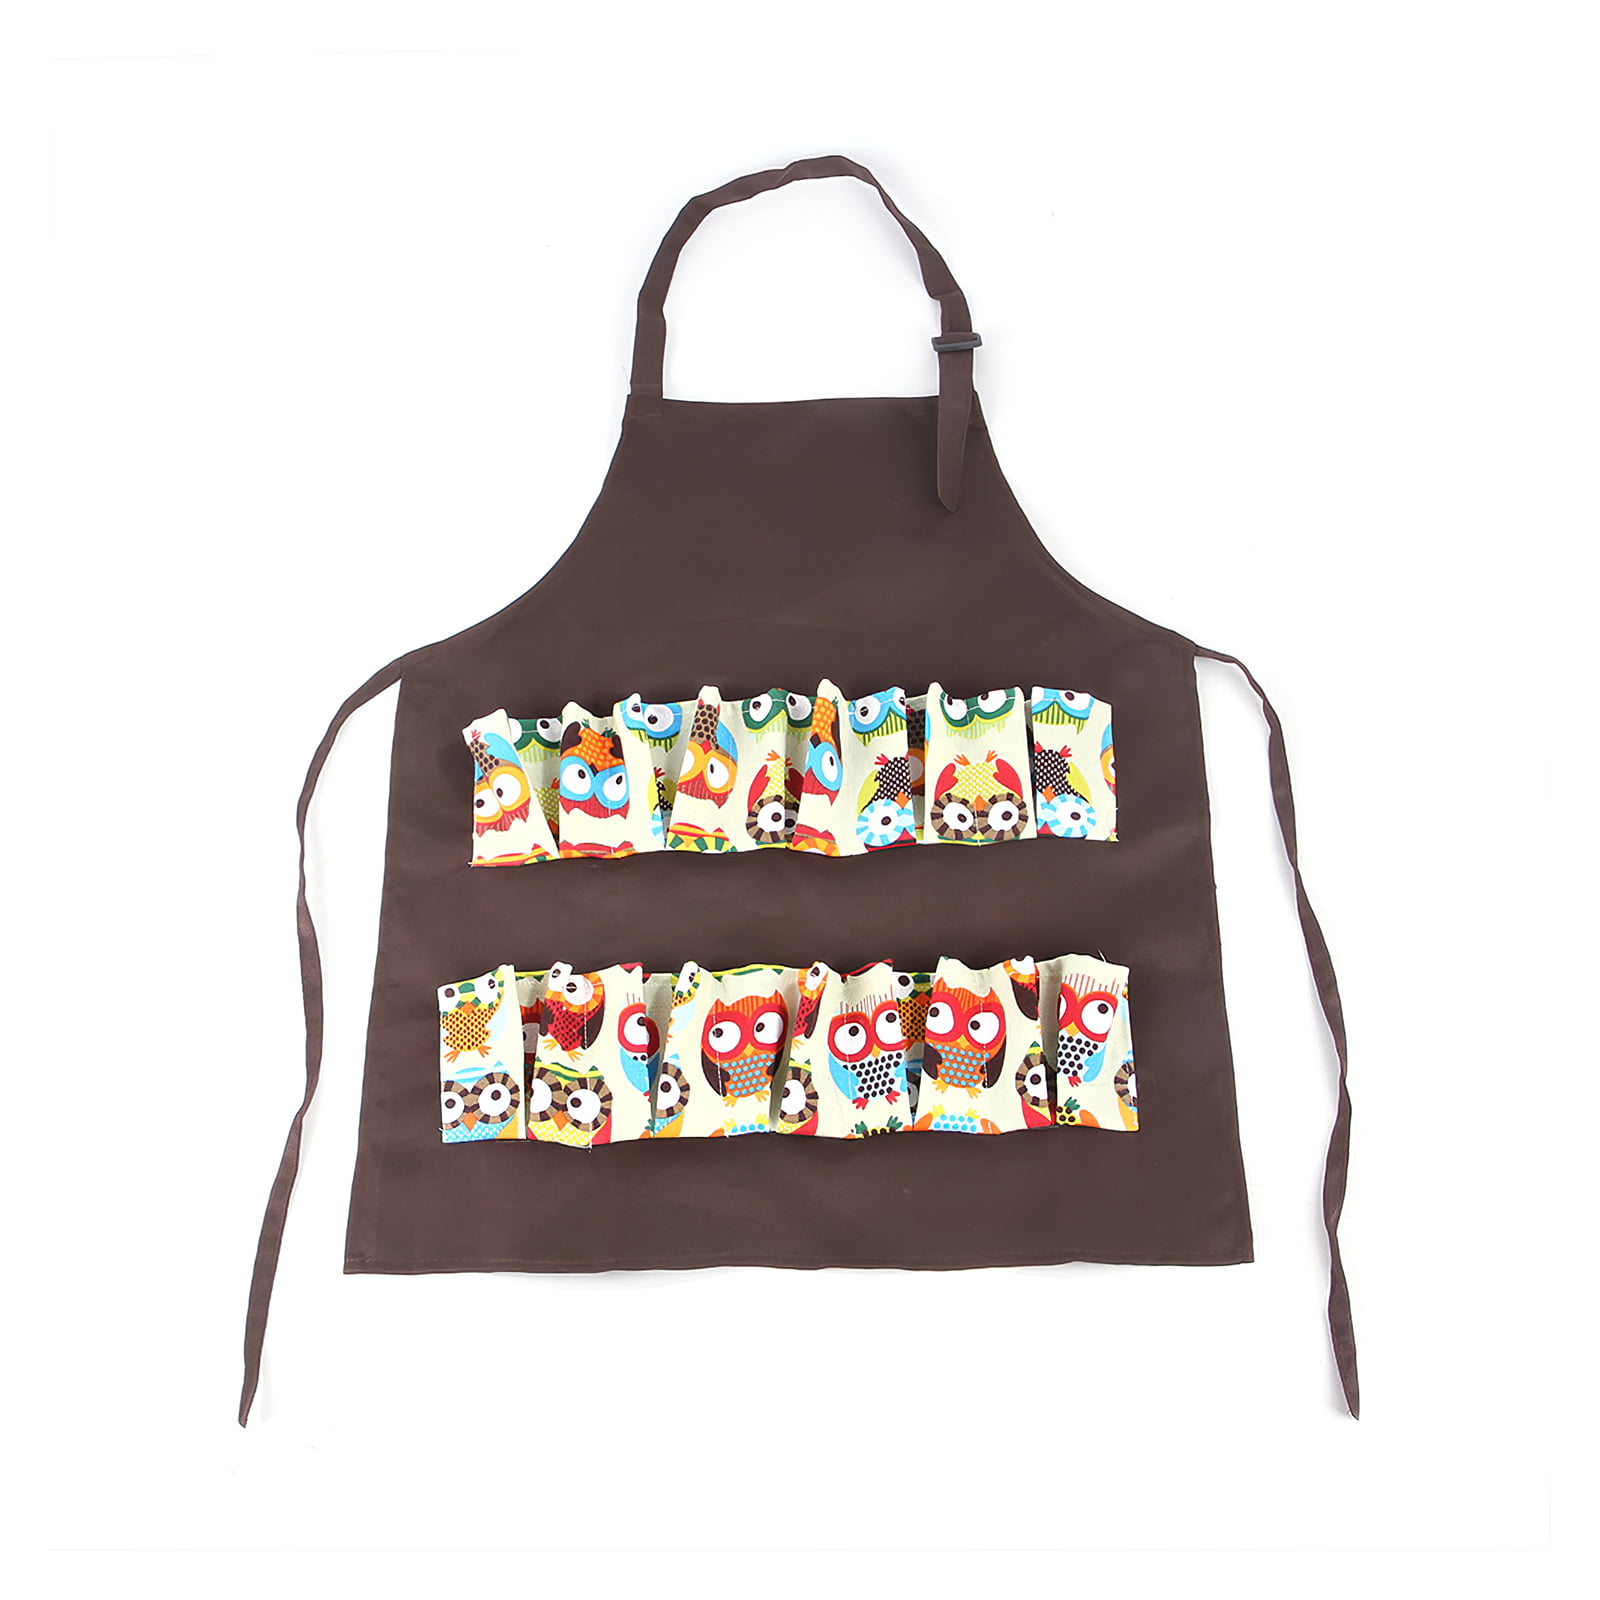 Perfect CCCYMM Farm Apron for Eggs Collecting Chicken Egg Gathering Pocket